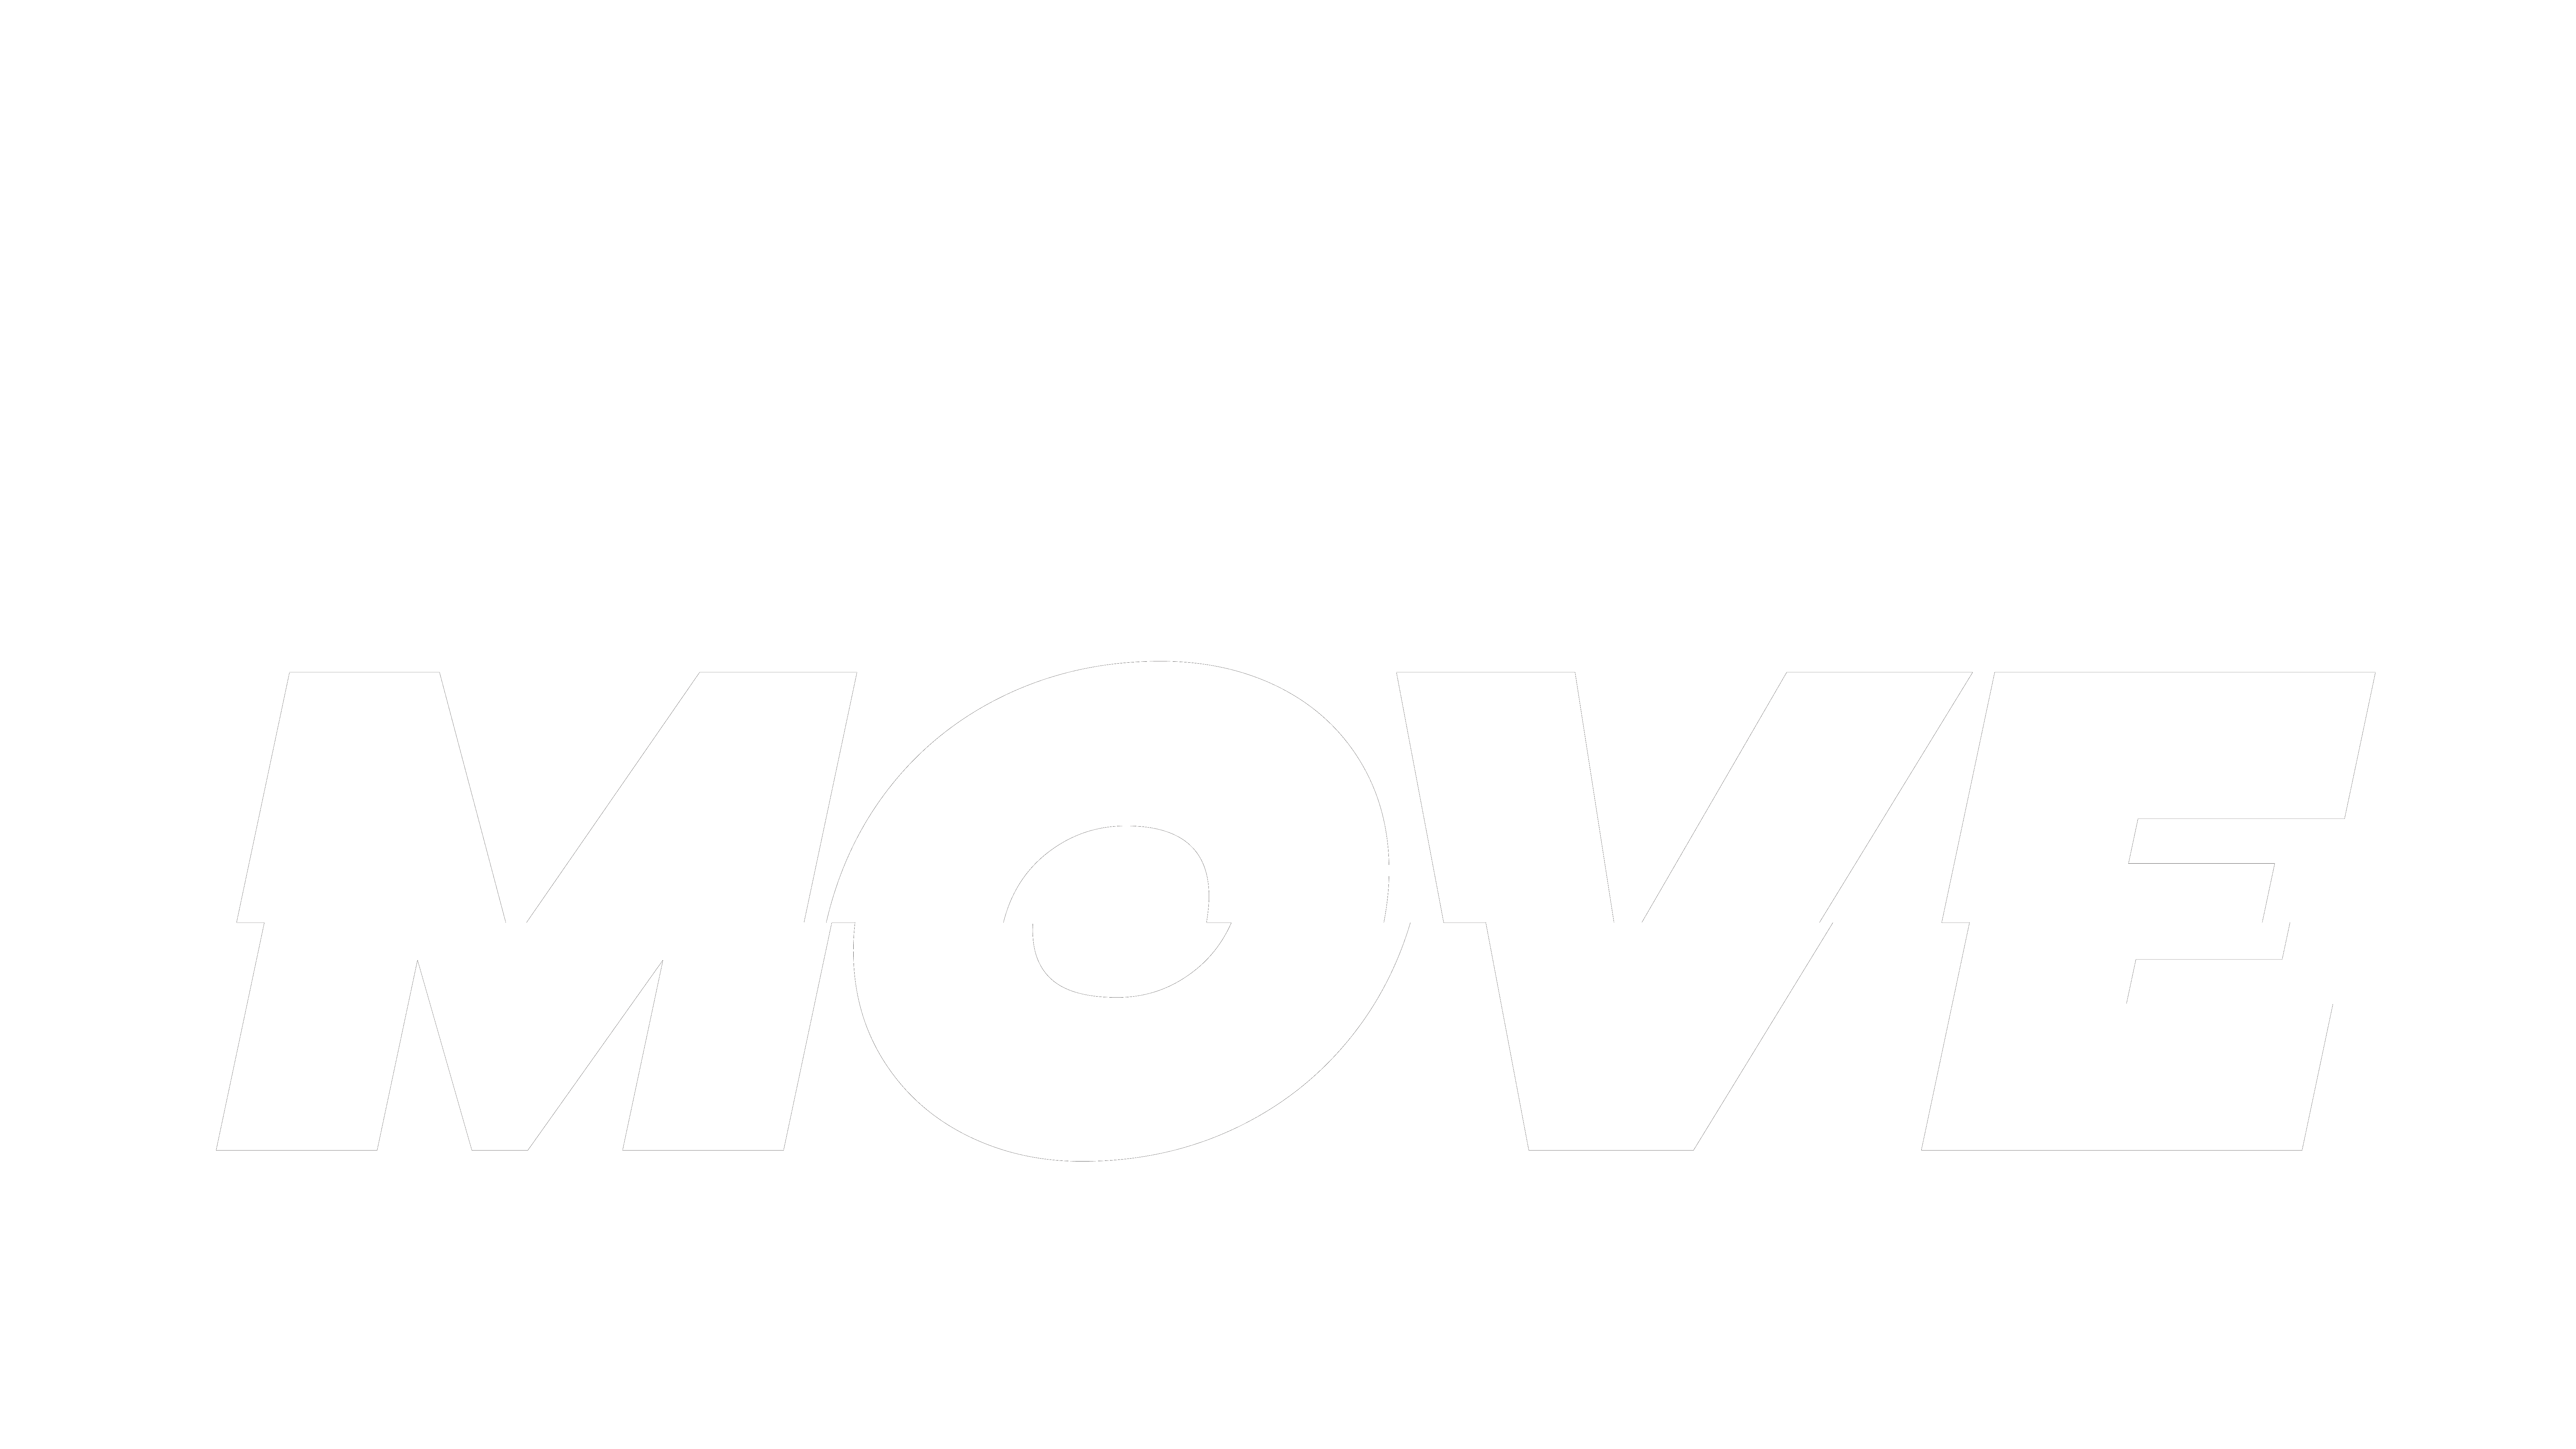 #itsmymove logo in white with transparent background